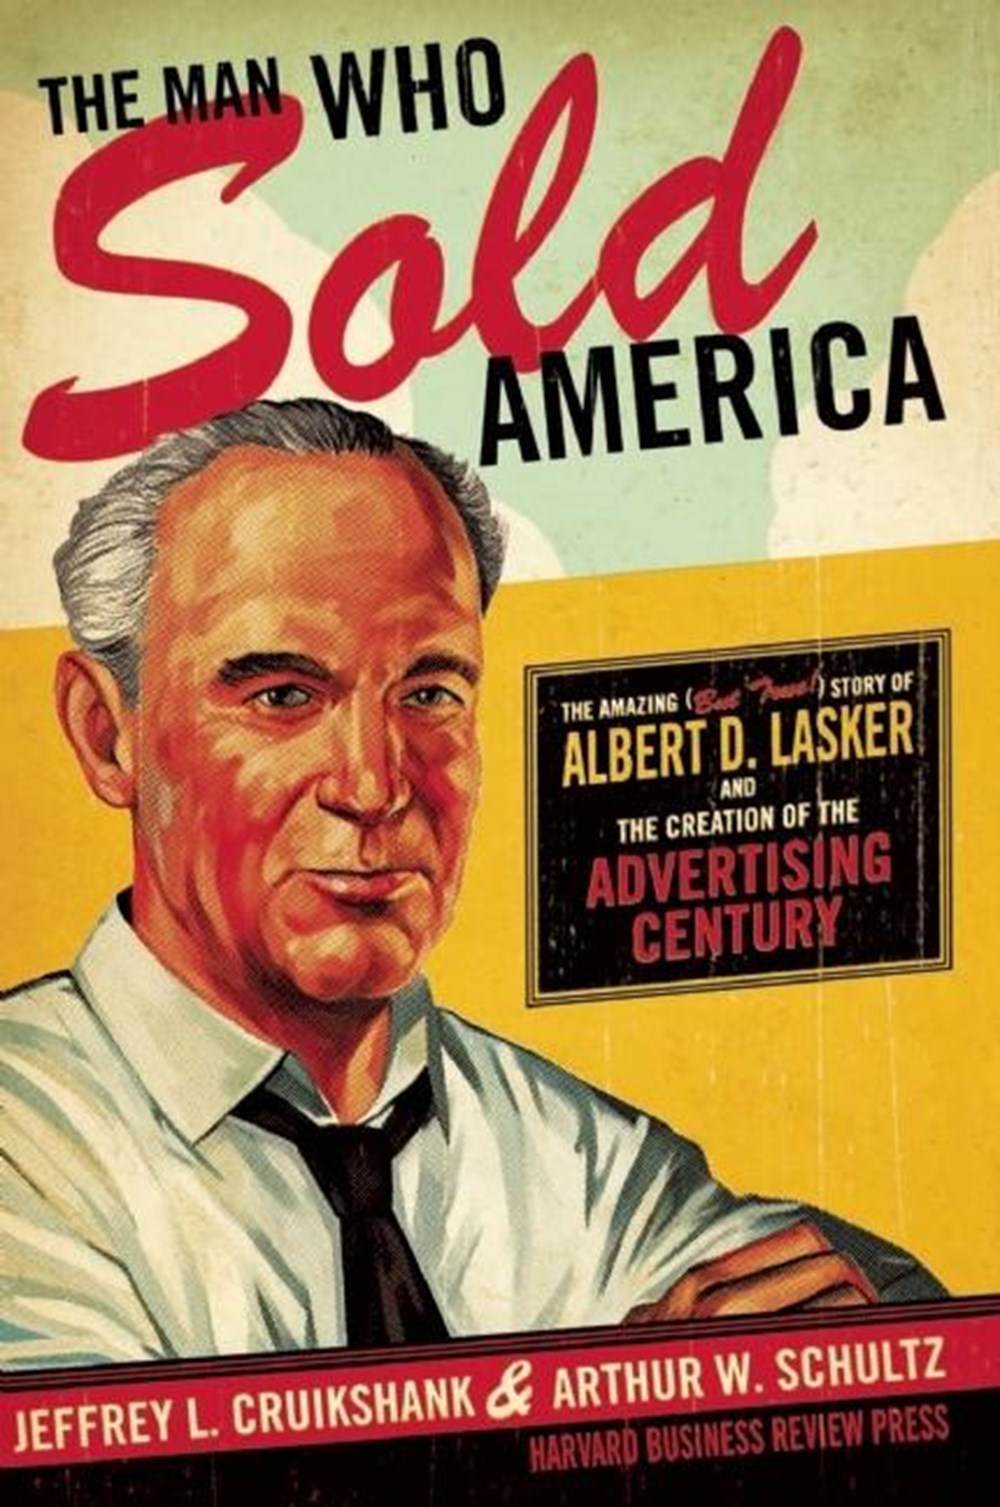 Man Who Sold America: The Amazing (But True!) Story of Albert D. Lasker and the Creation of the Adve